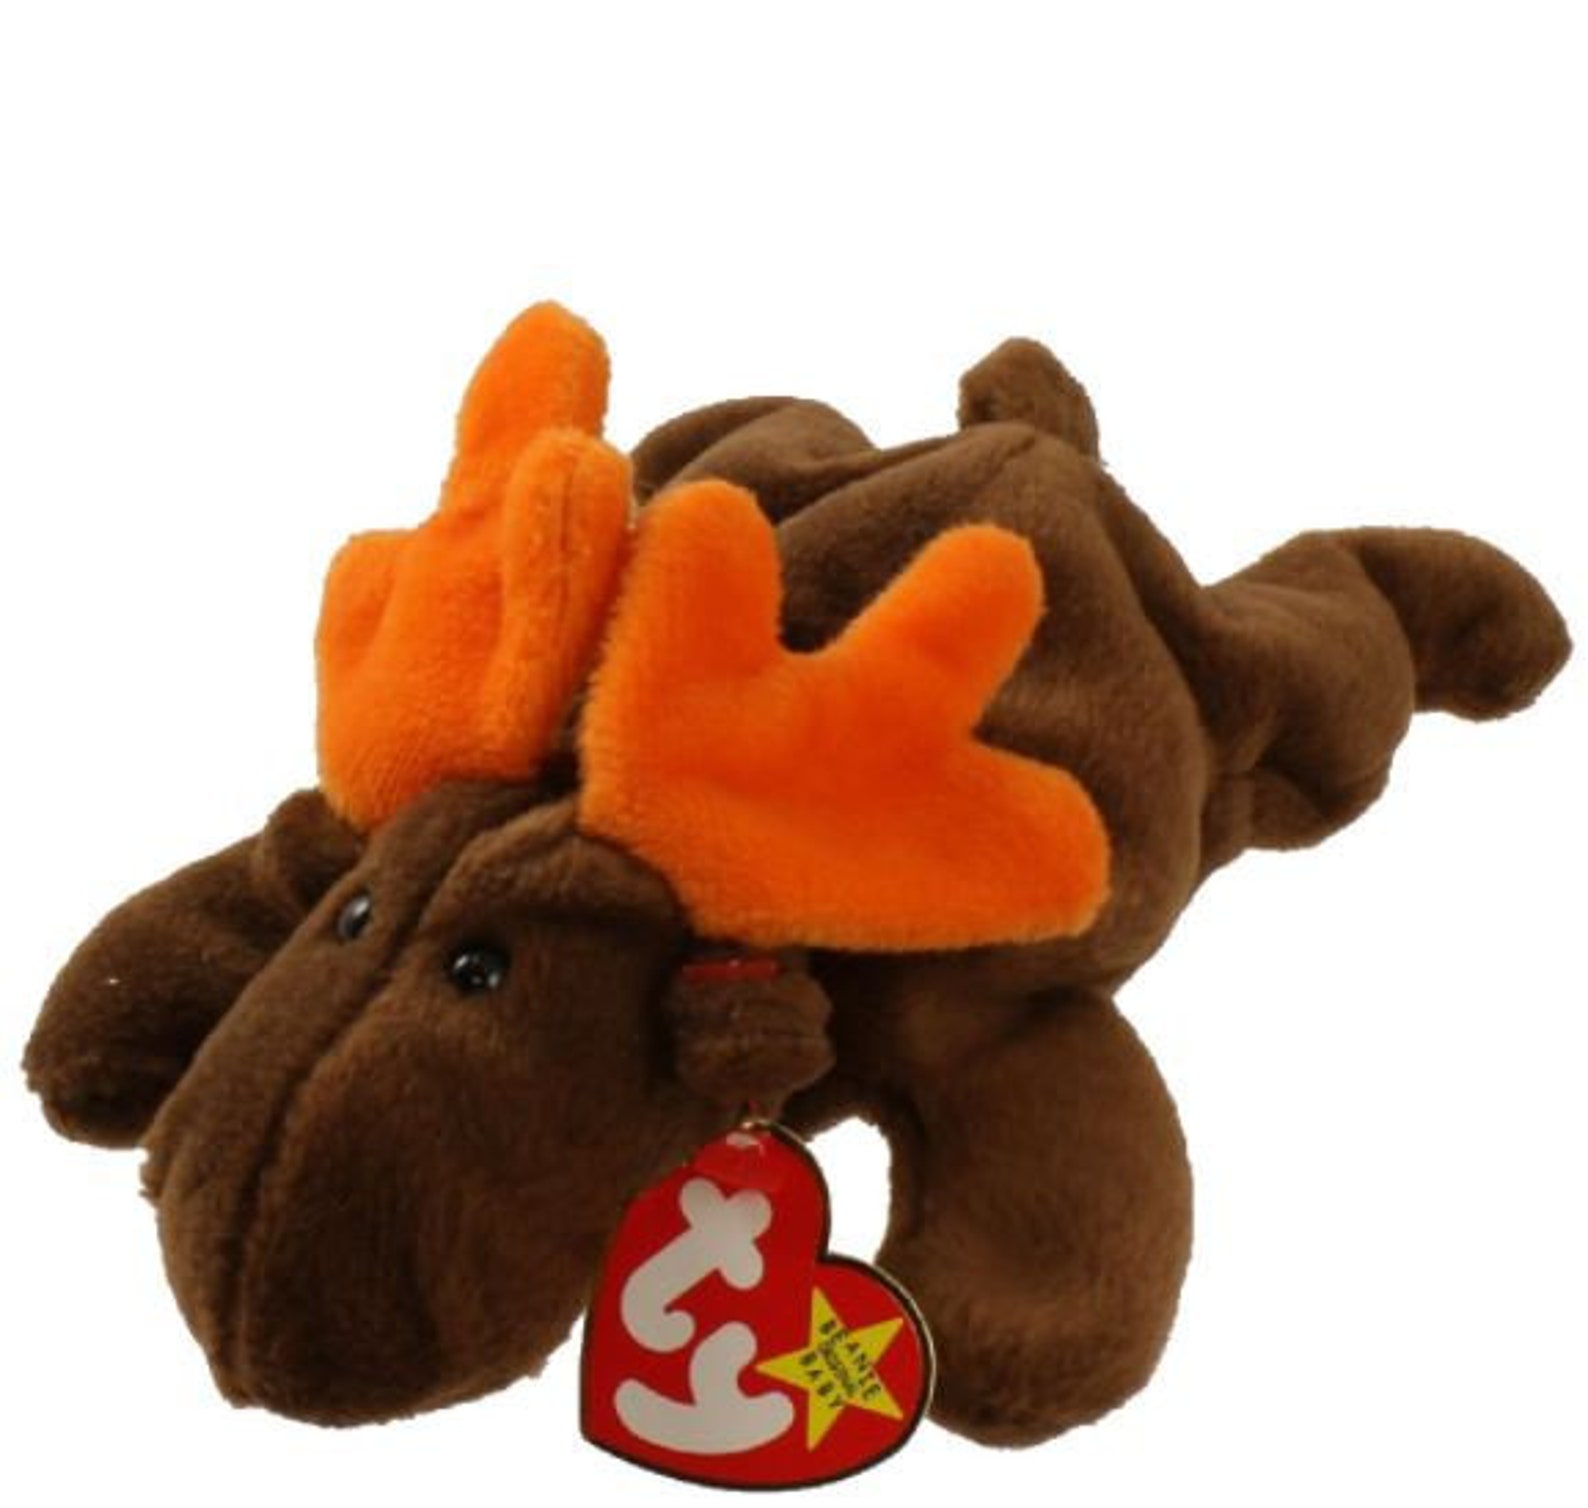 TY Original Beanie Baby Chocolate the Moose Mint Condition - Etsy